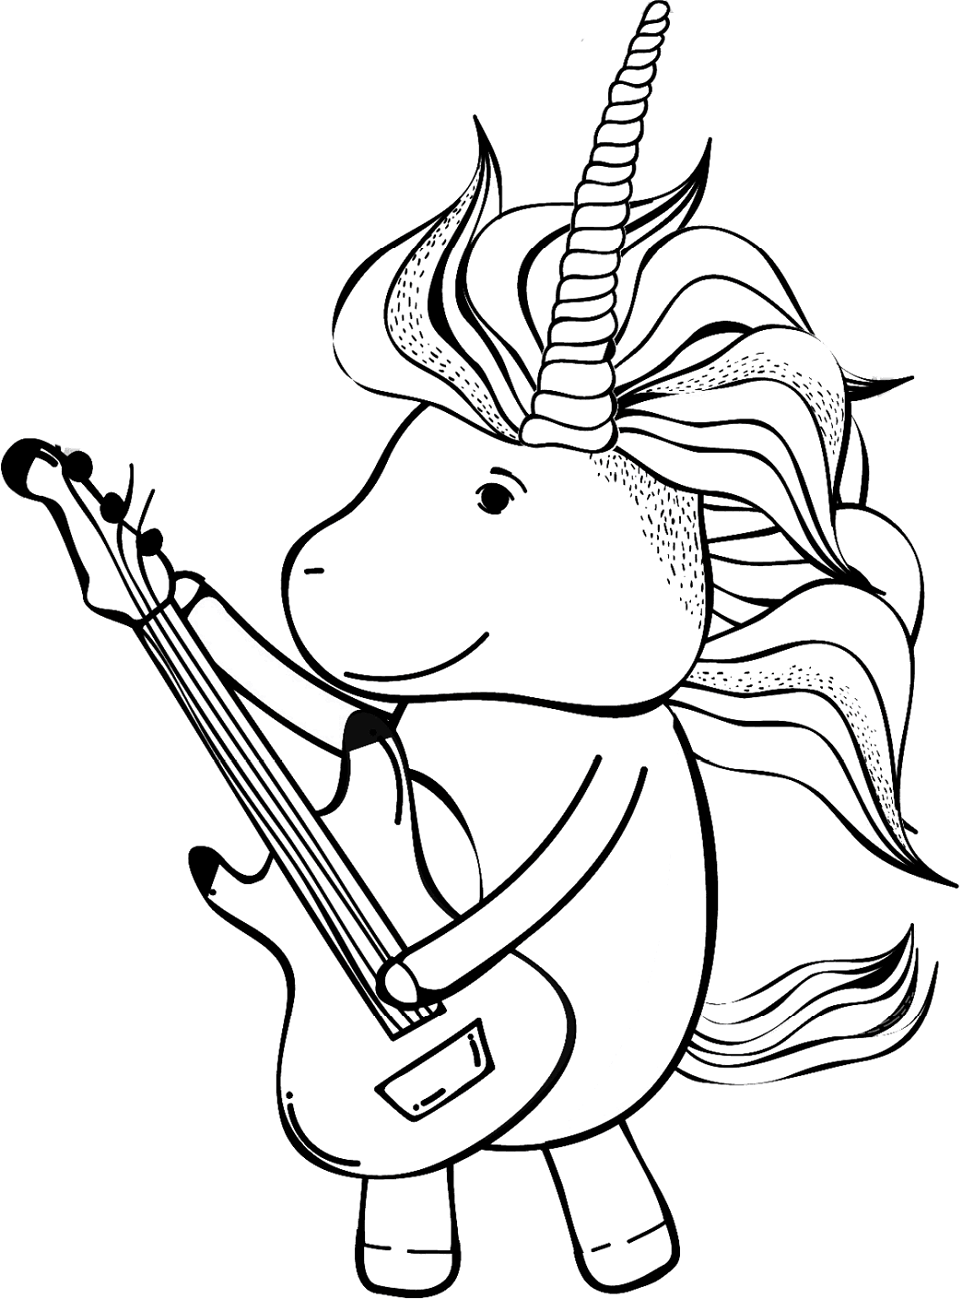 Unicorn Coloring Pages   Free Printable Coloring Pages for Kids